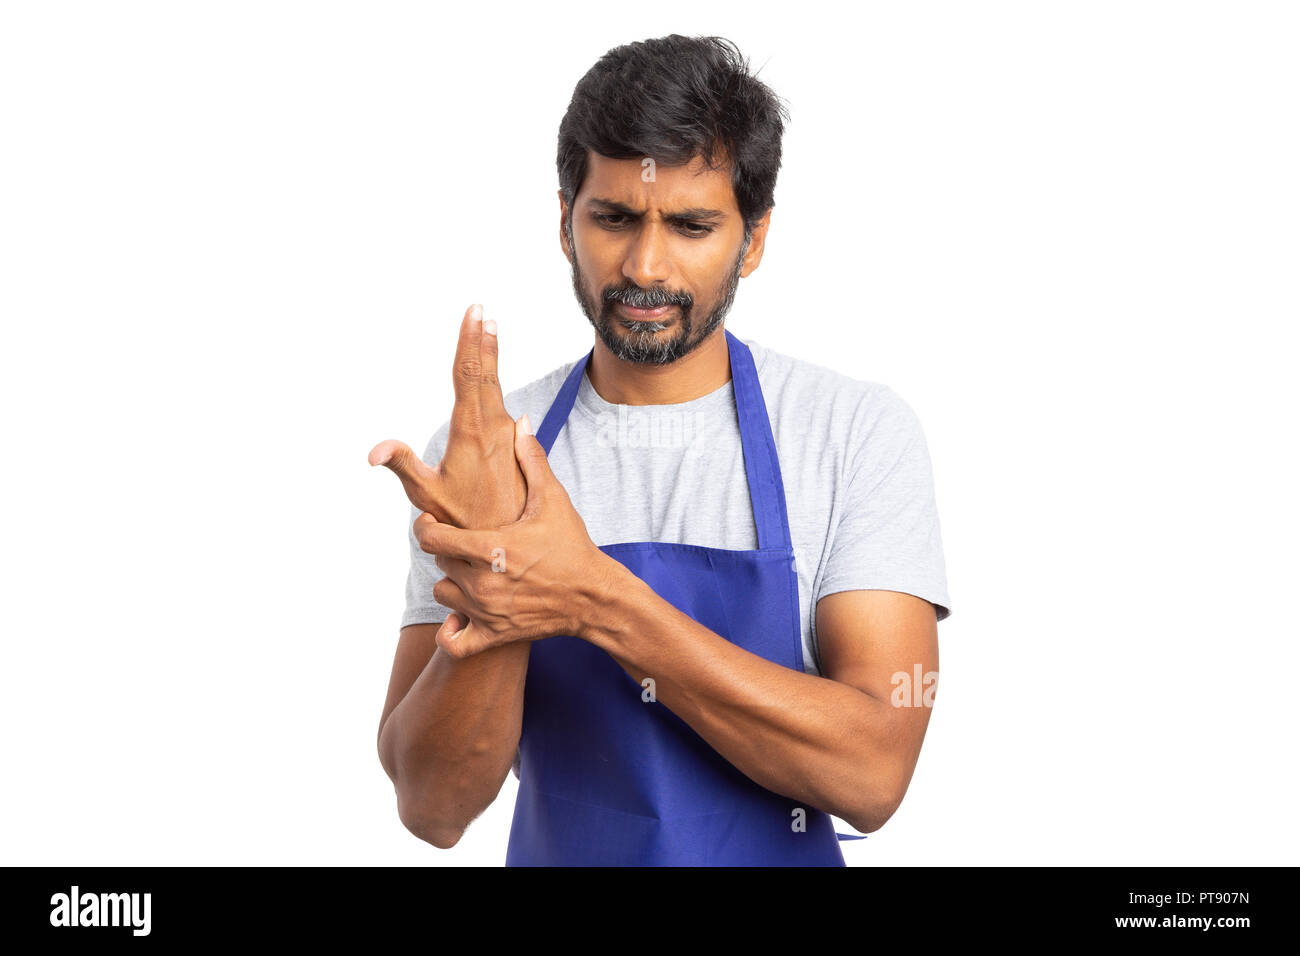 Hypermarket or supermarket indian male employee touching painful wrist as injured concept isolated on white background Stock Photo